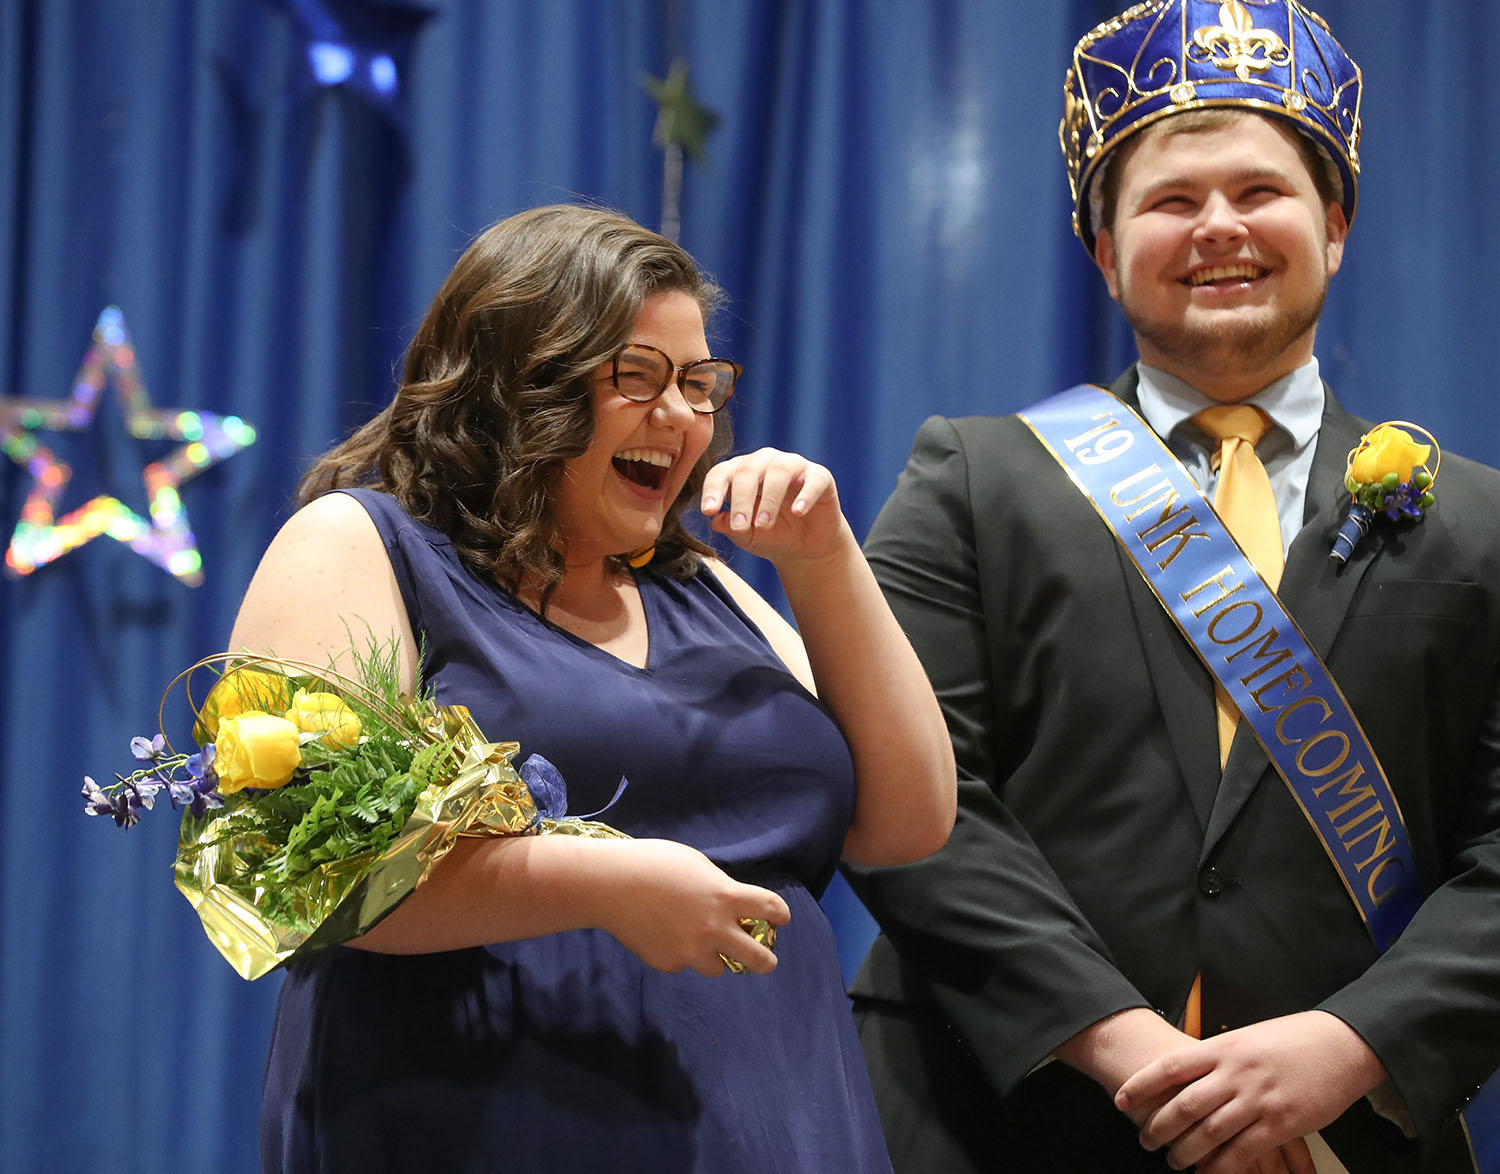 Makenzie Petersen reacts after she was named UNK’s homecoming queen earlier this month. Her best friend, Jacob Roth of Milford, right, was crowned homecoming king. (Photos by Corbey R. Dorsey, UNK Communications)